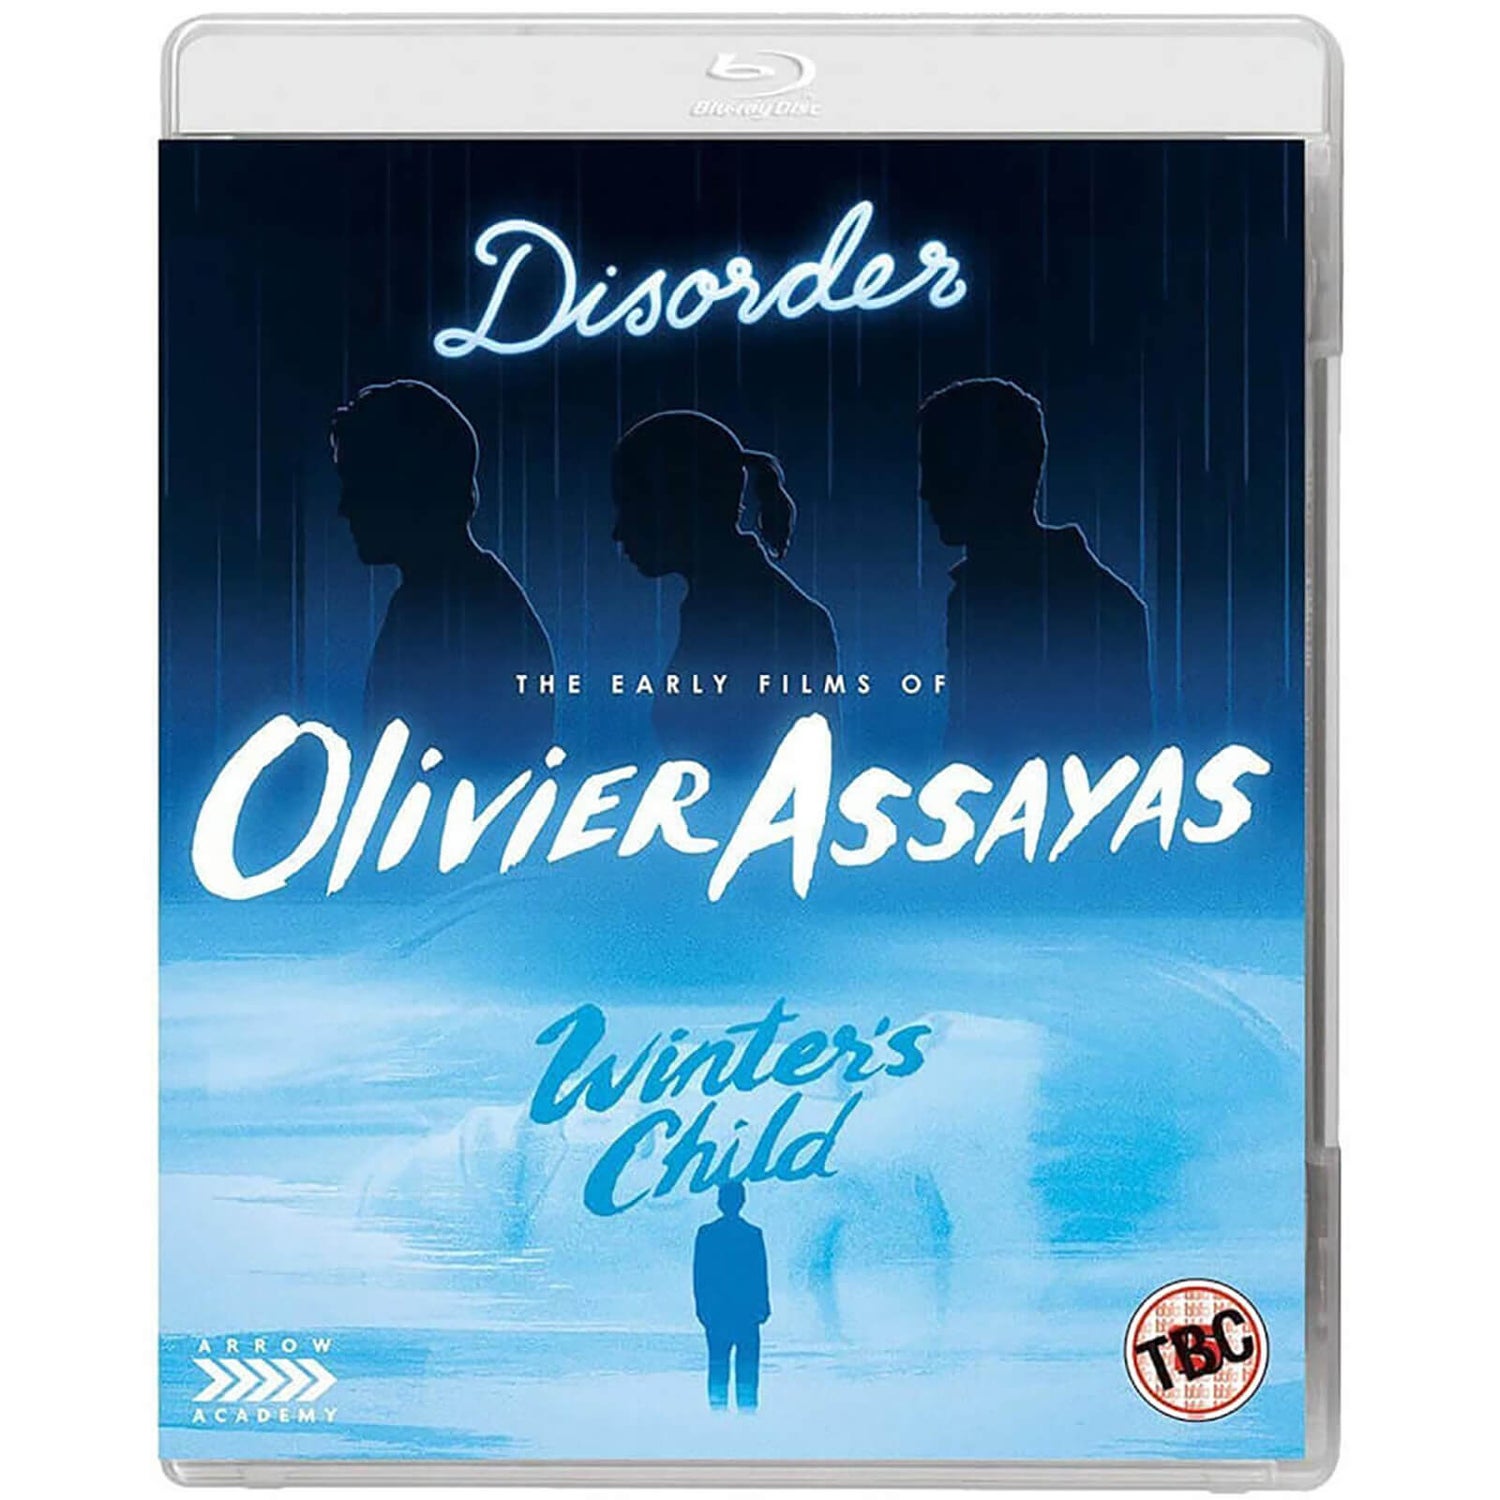 The Early Films of Olivier Assayas (Disorder, Winter's Child)